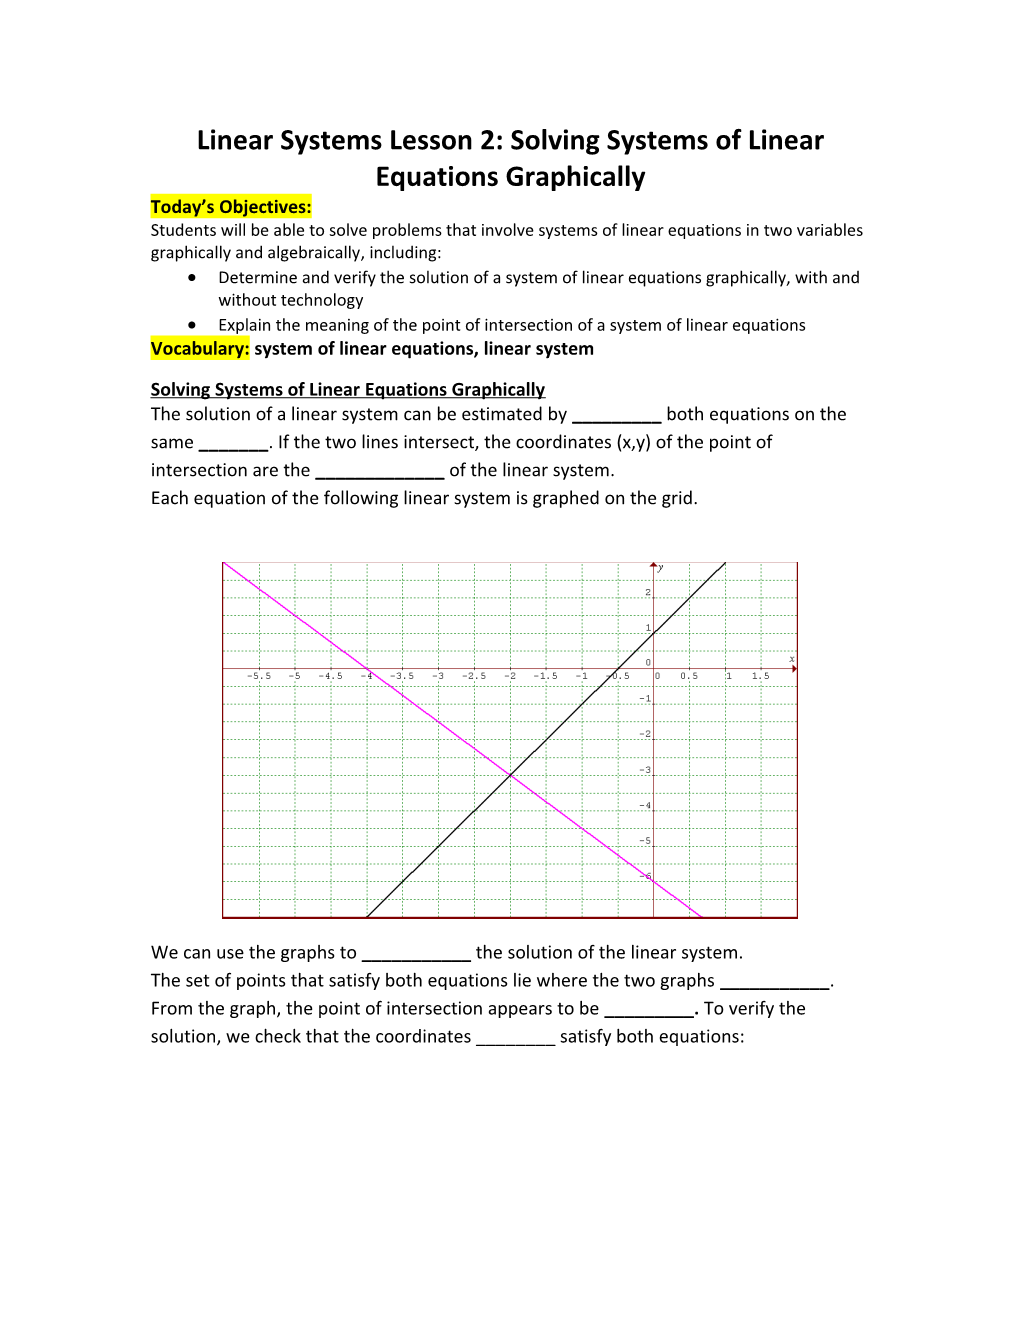 Linear Systems Lesson 2: Solving Systems of Linear Equations Graphically